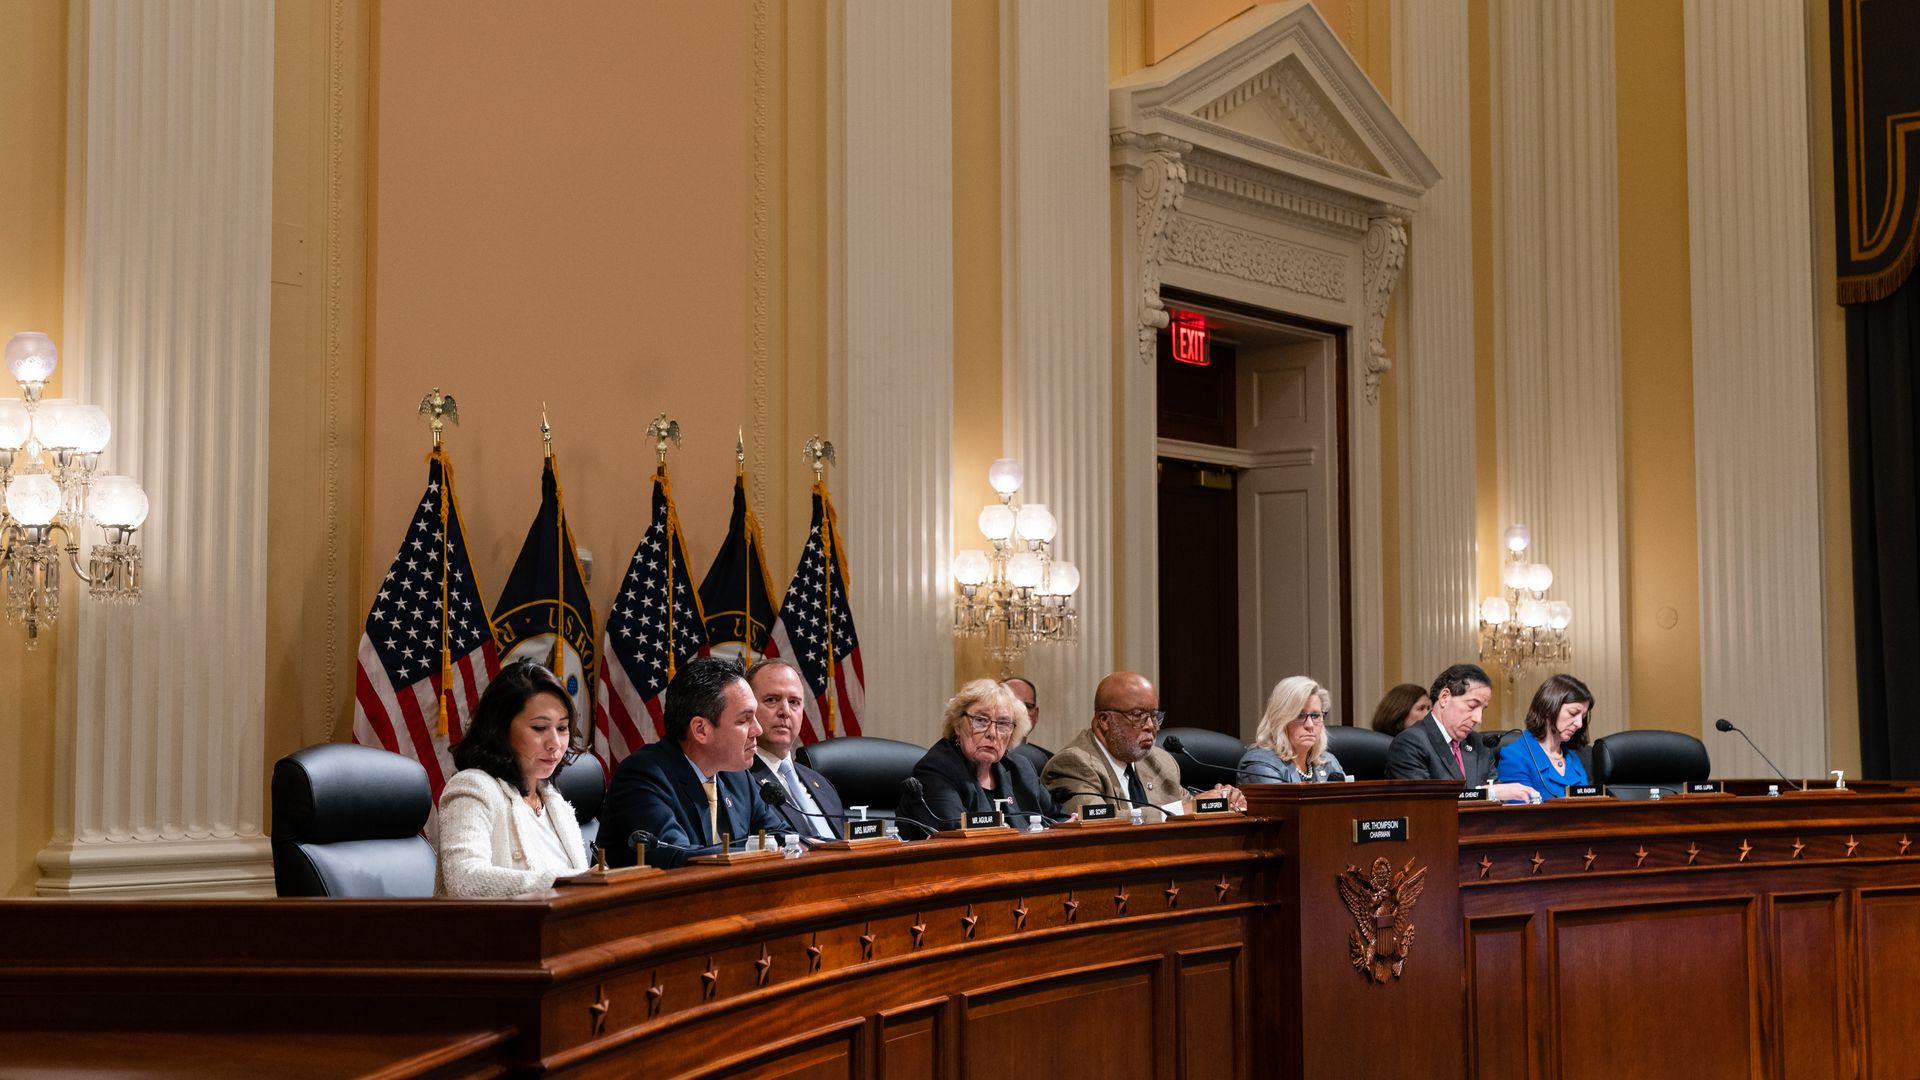 Members of the Jan. 6 select committee during a meeting in March 2022.